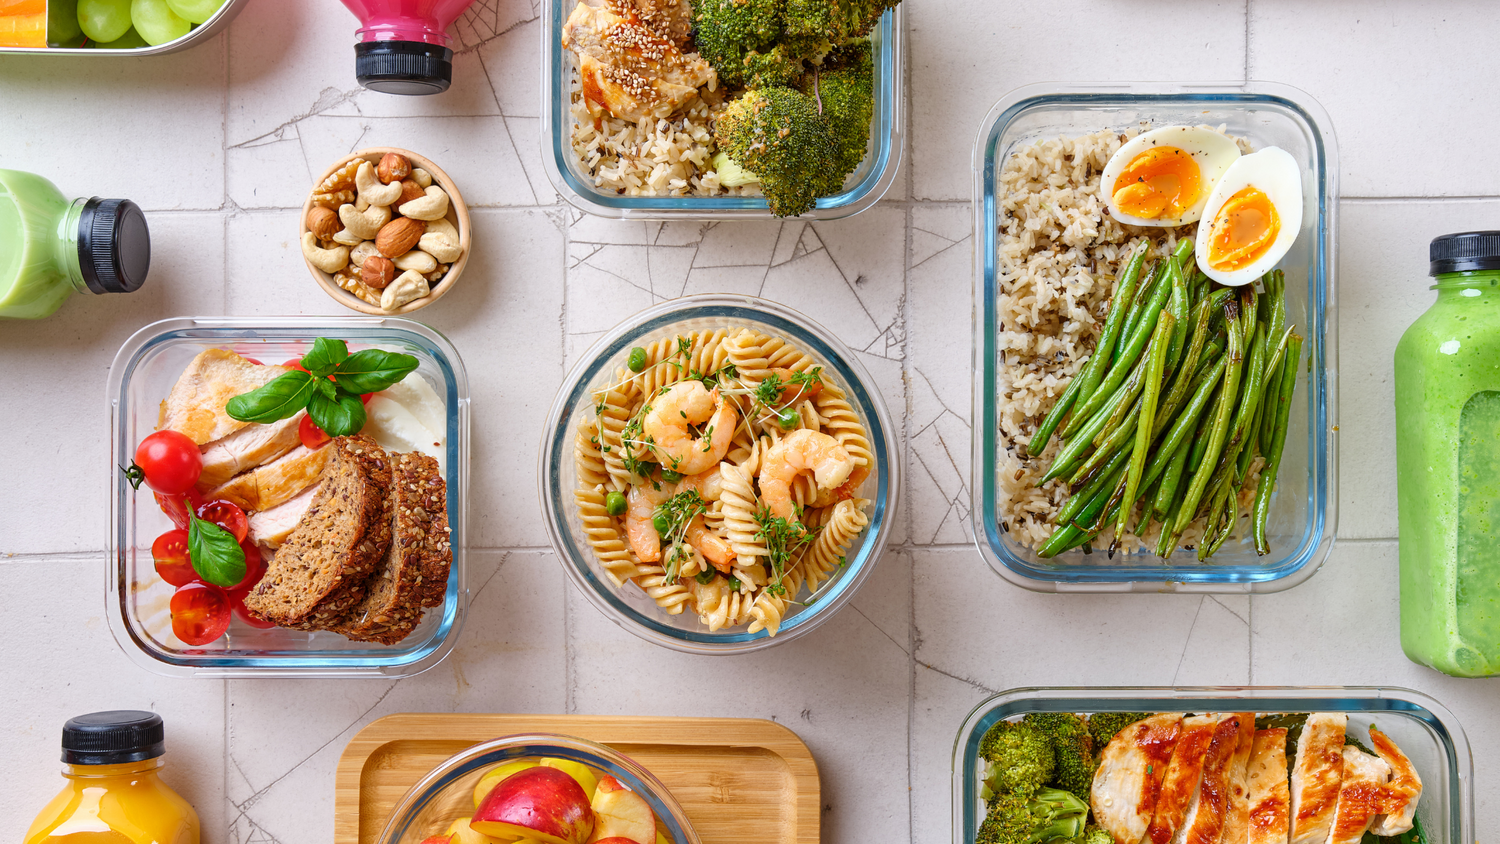 A beginner’s guide to easy and tasty meal prep